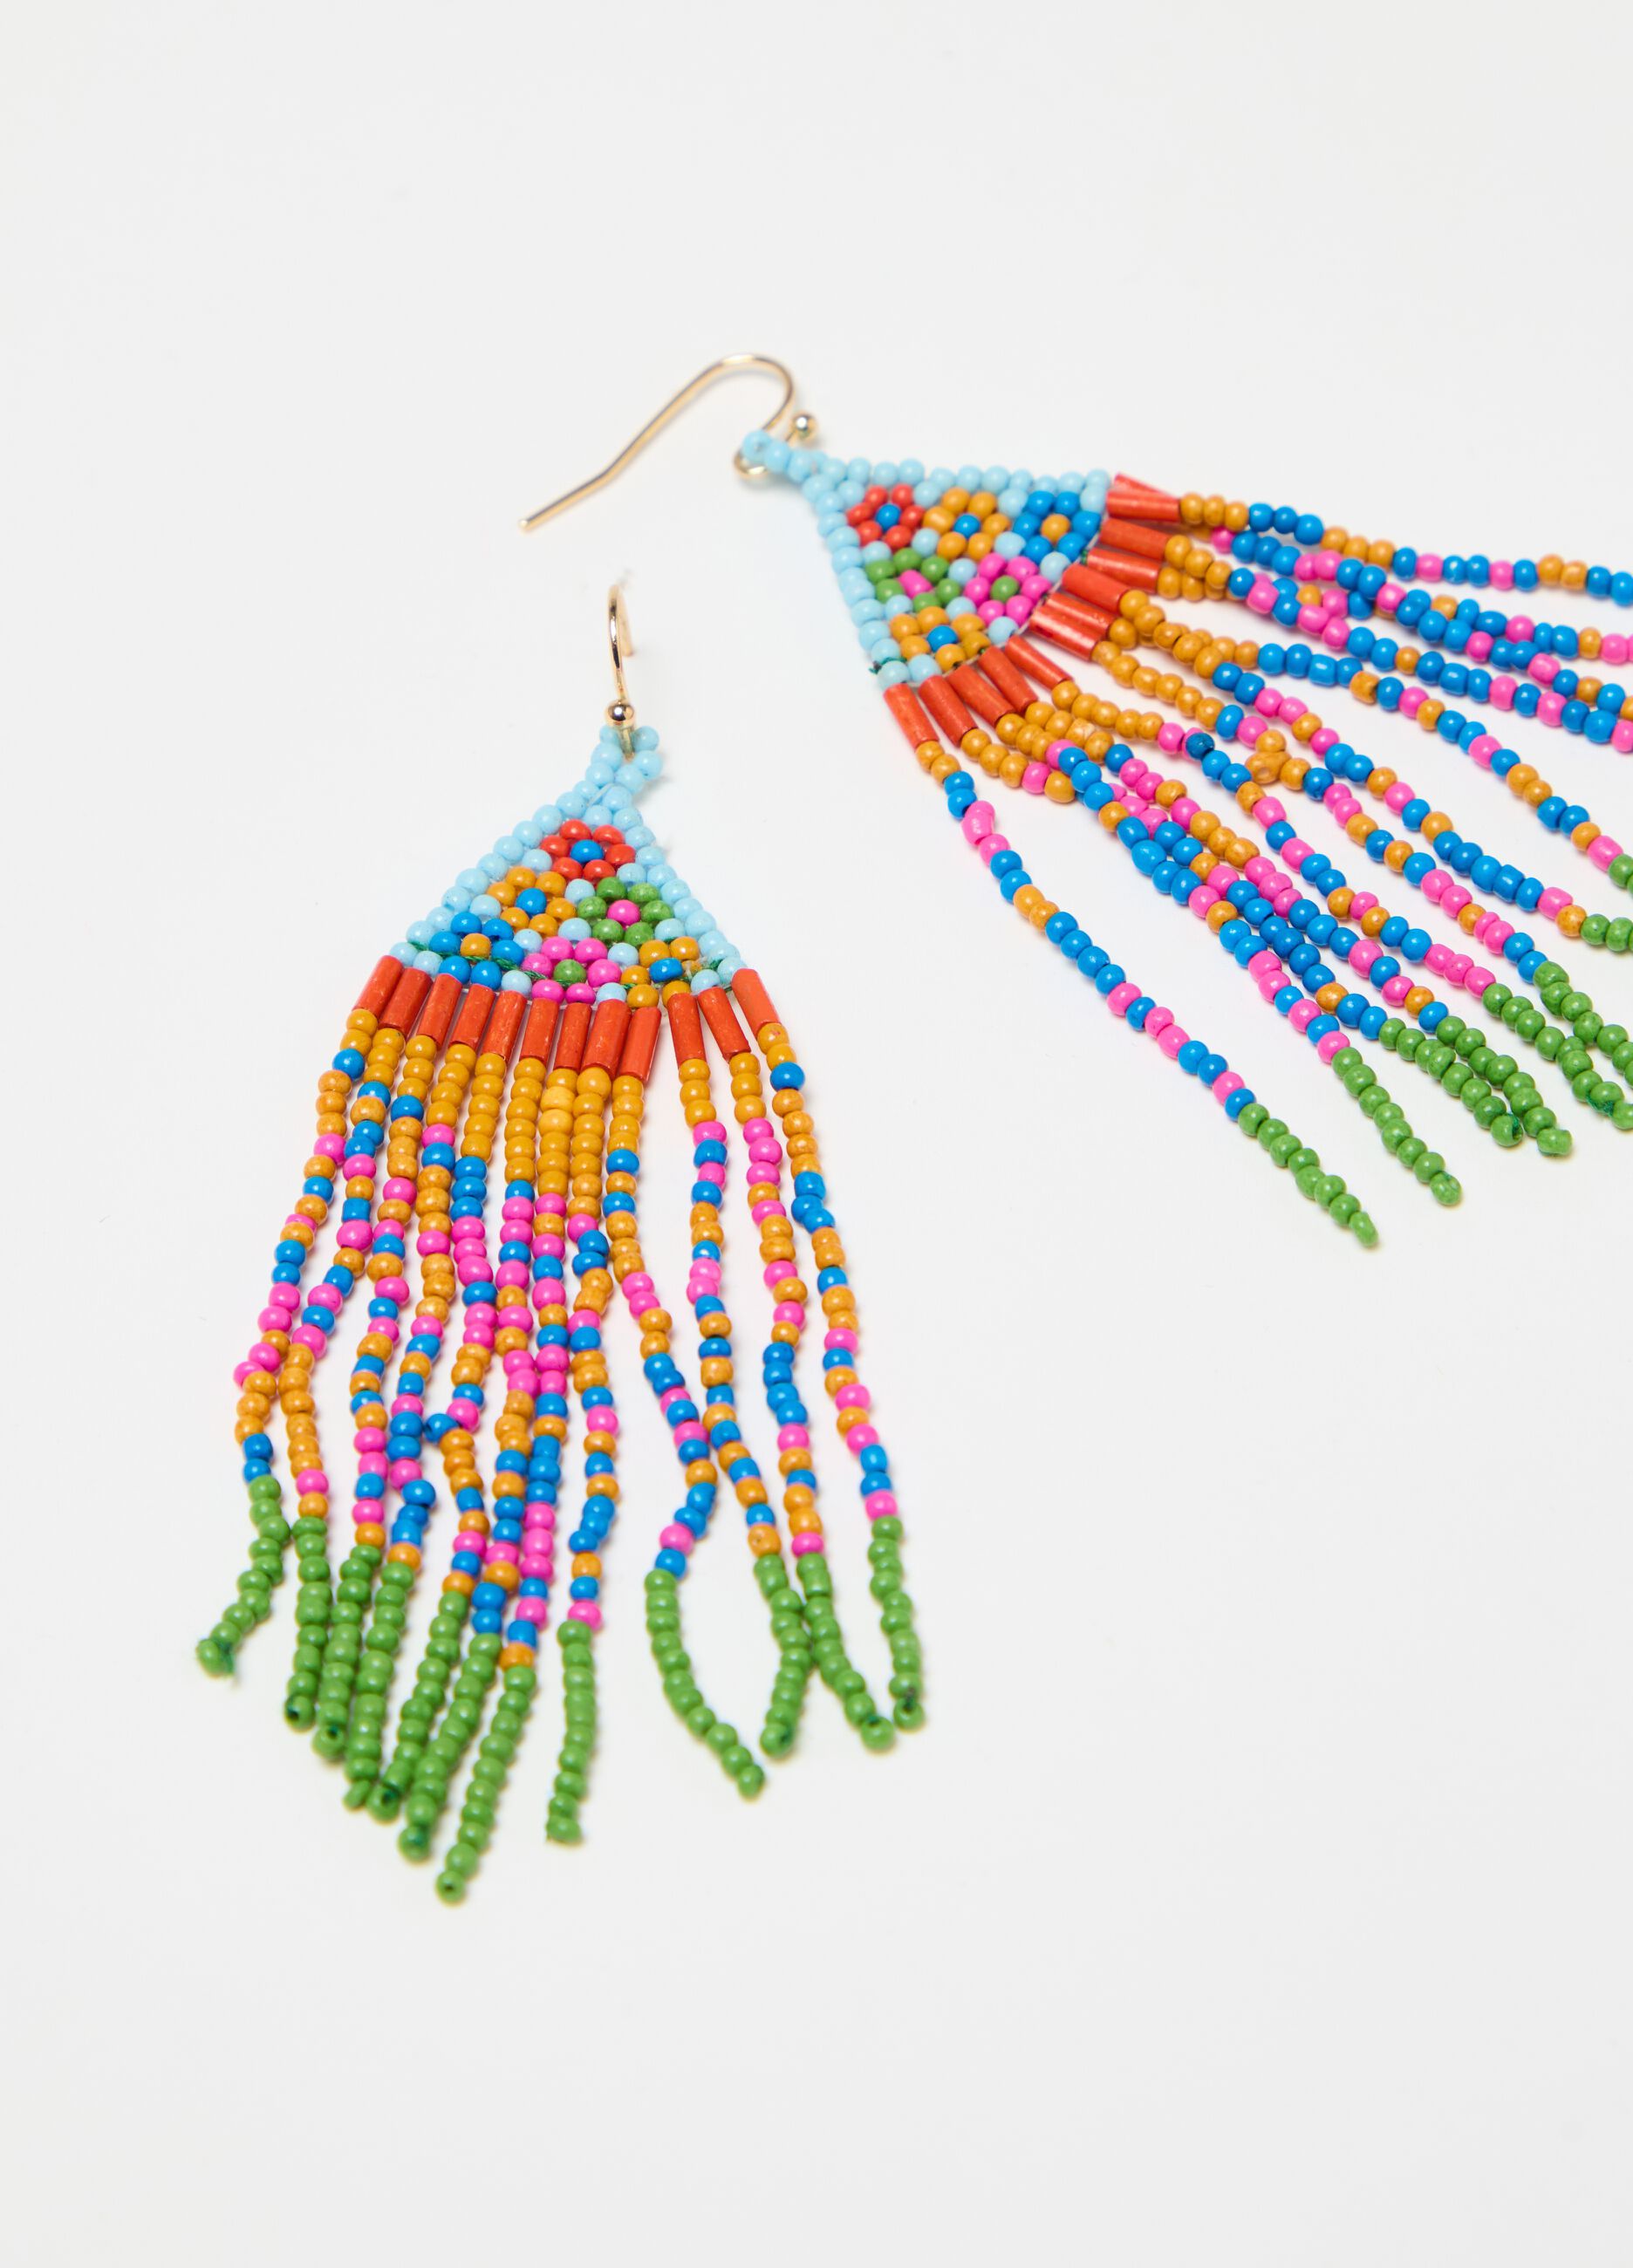 Pendant earrings with beaded fringes